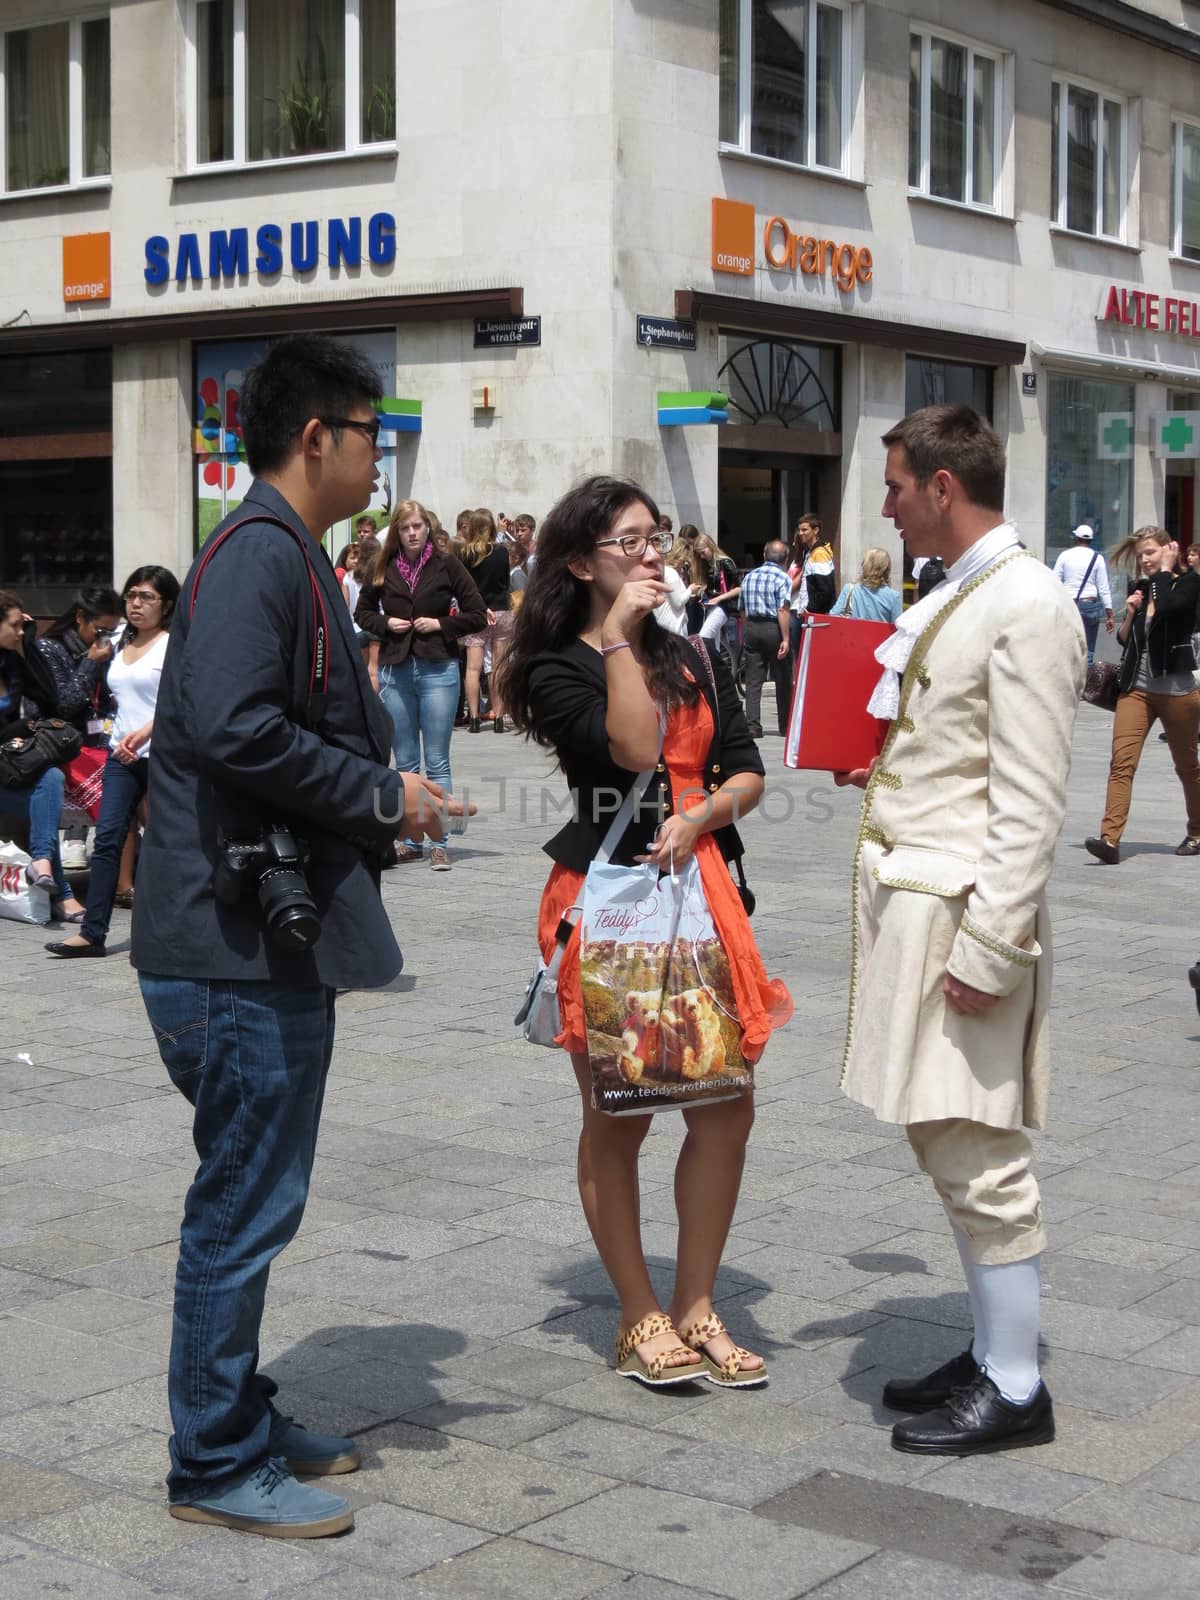 Mozart man and Asian tourists by paolo77